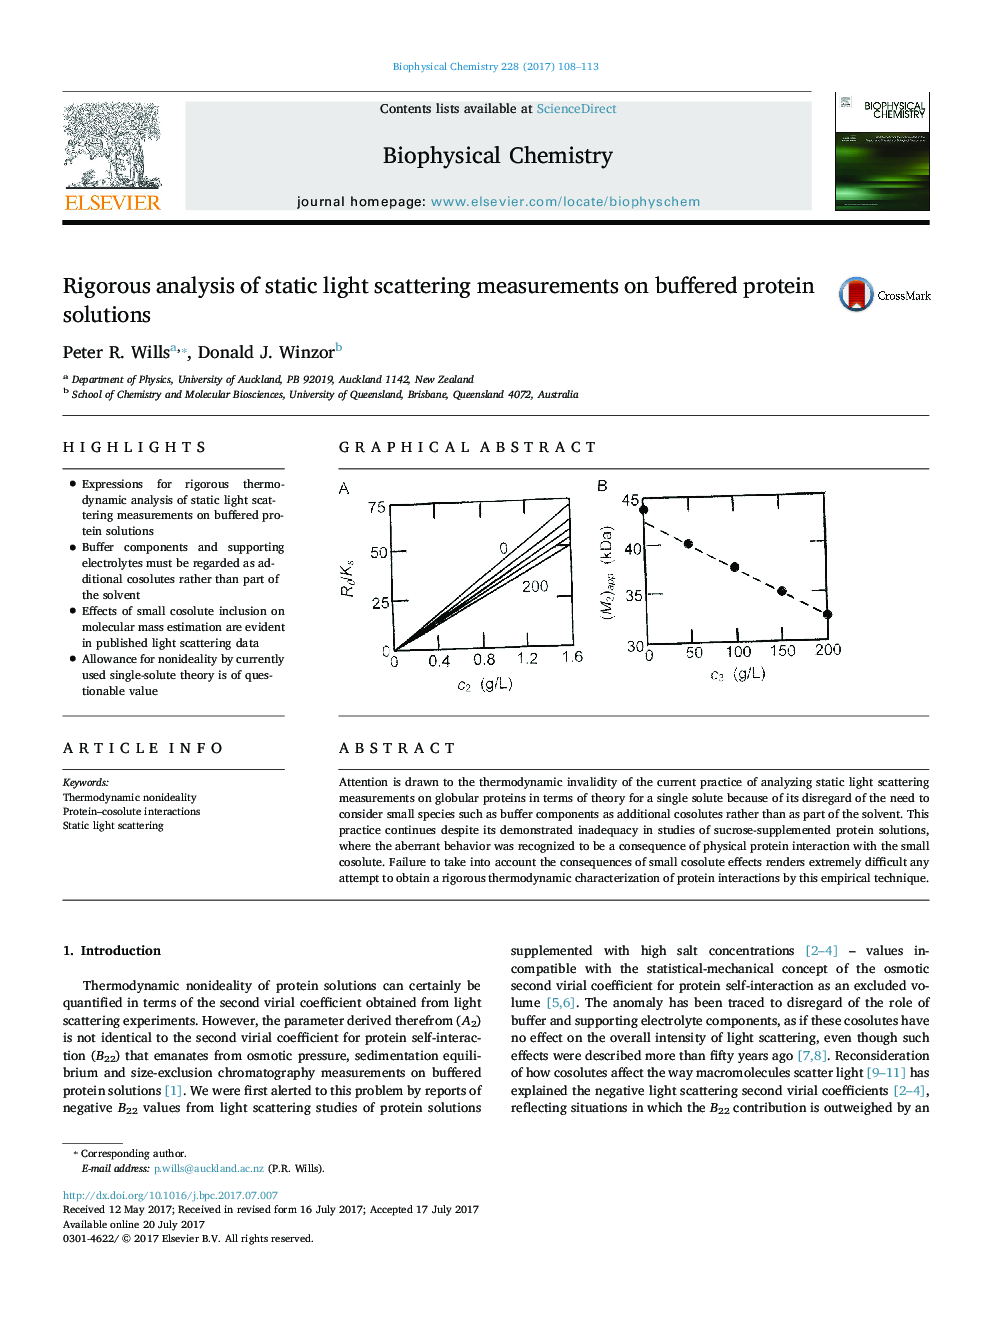 Rigorous analysis of static light scattering measurements on buffered protein solutions